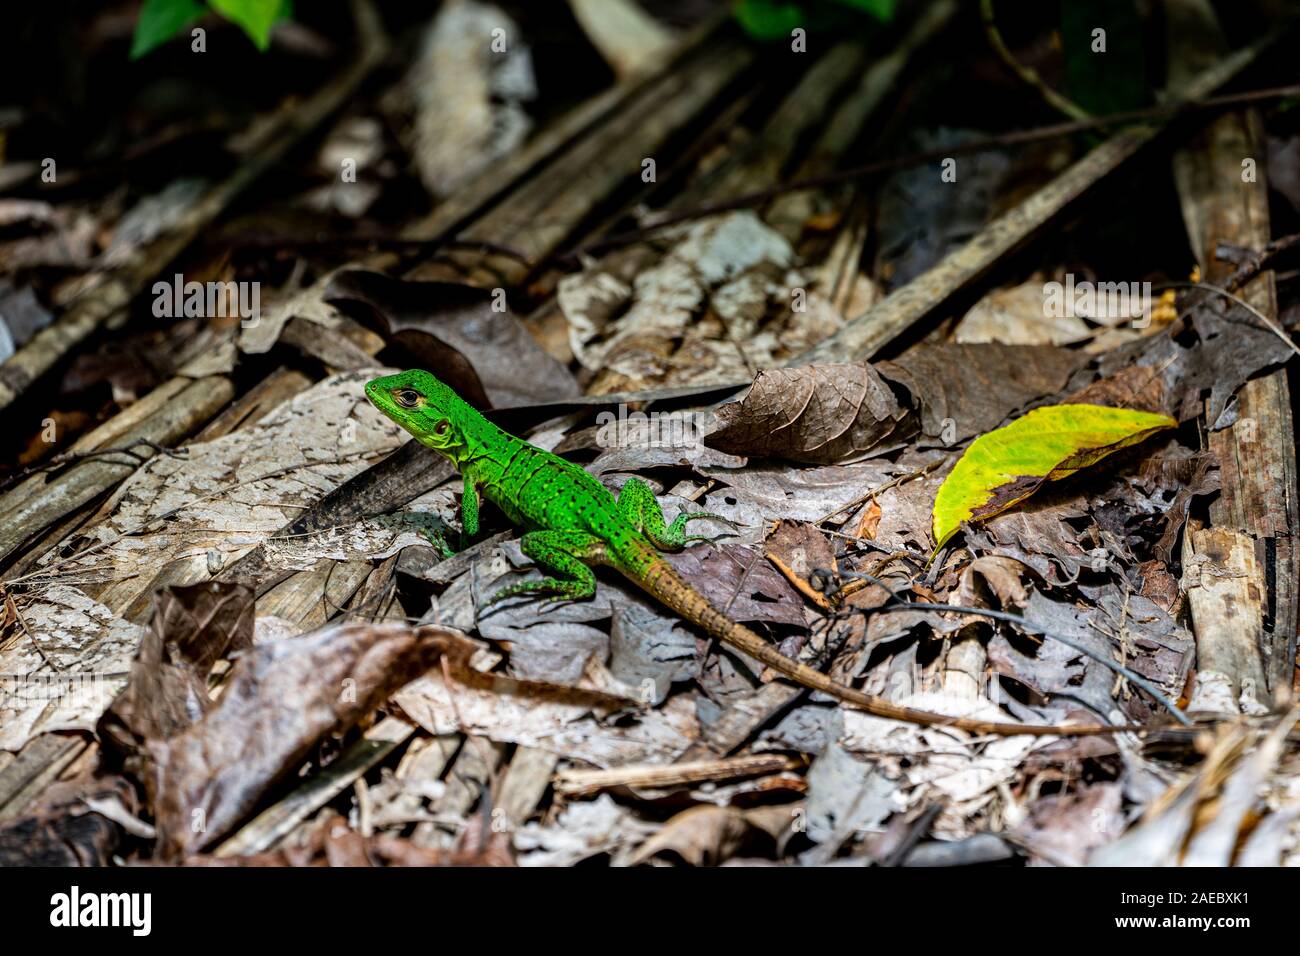 Green Spiny Lizard (Sceloporus malachiticus), also known as the emerald swift. Photographed in Costa Rica Stock Photo